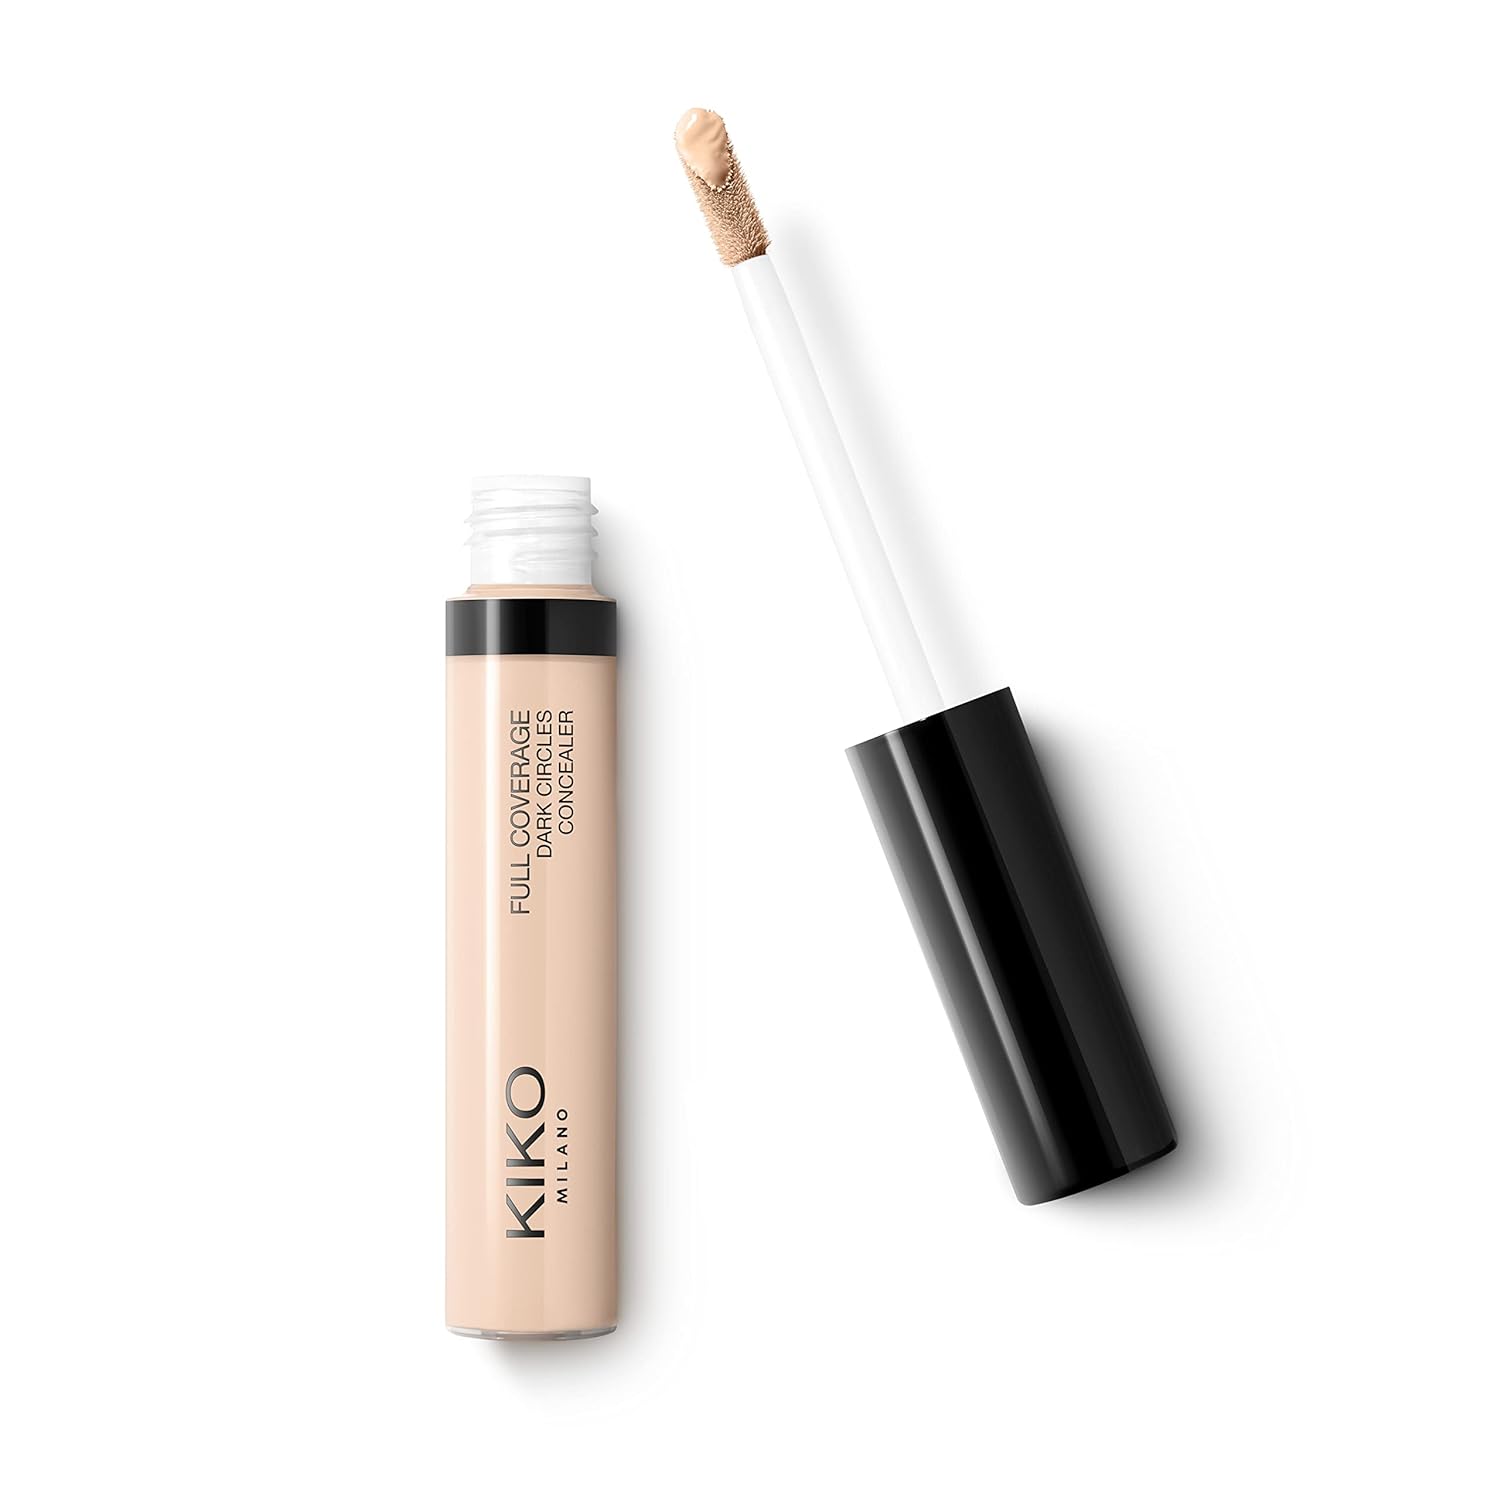 KIKO Milano Full Coverage Dark Circles Concealer 02 | Liquid Concealer for the Eye Area and Face with High Coverage